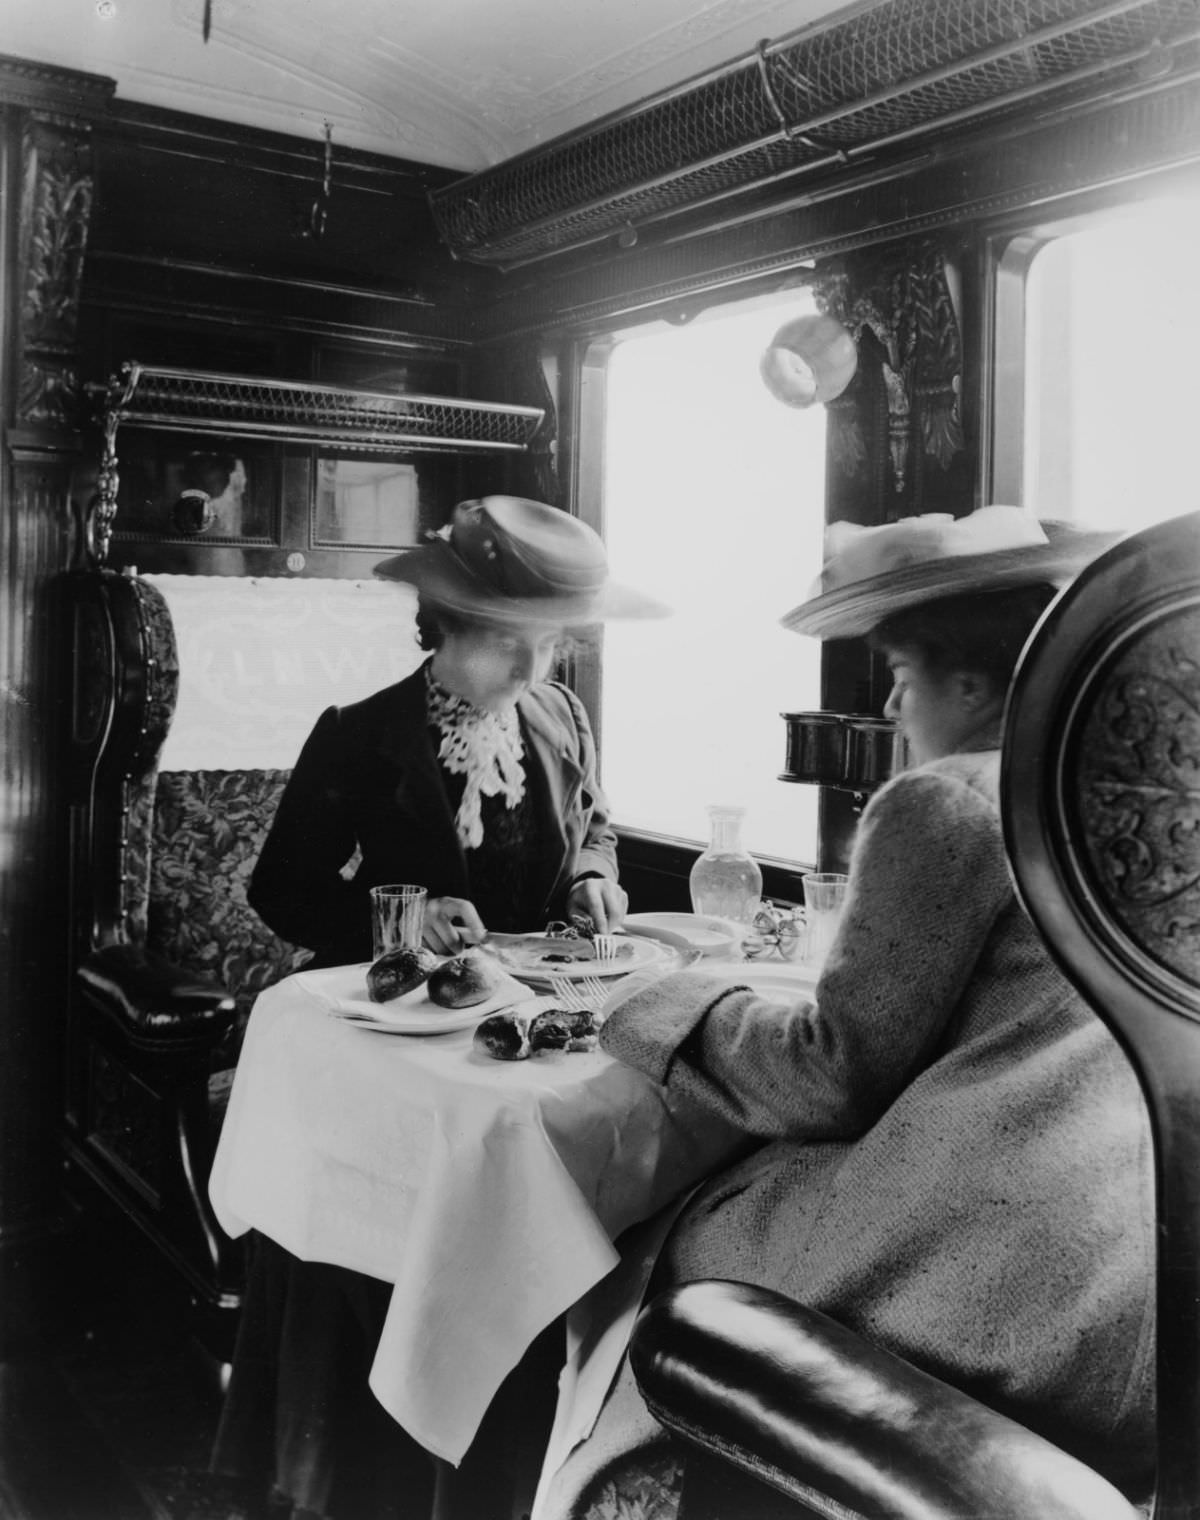 Two female passengers eating a meal in a London & North Western Railway dining car, 1905.